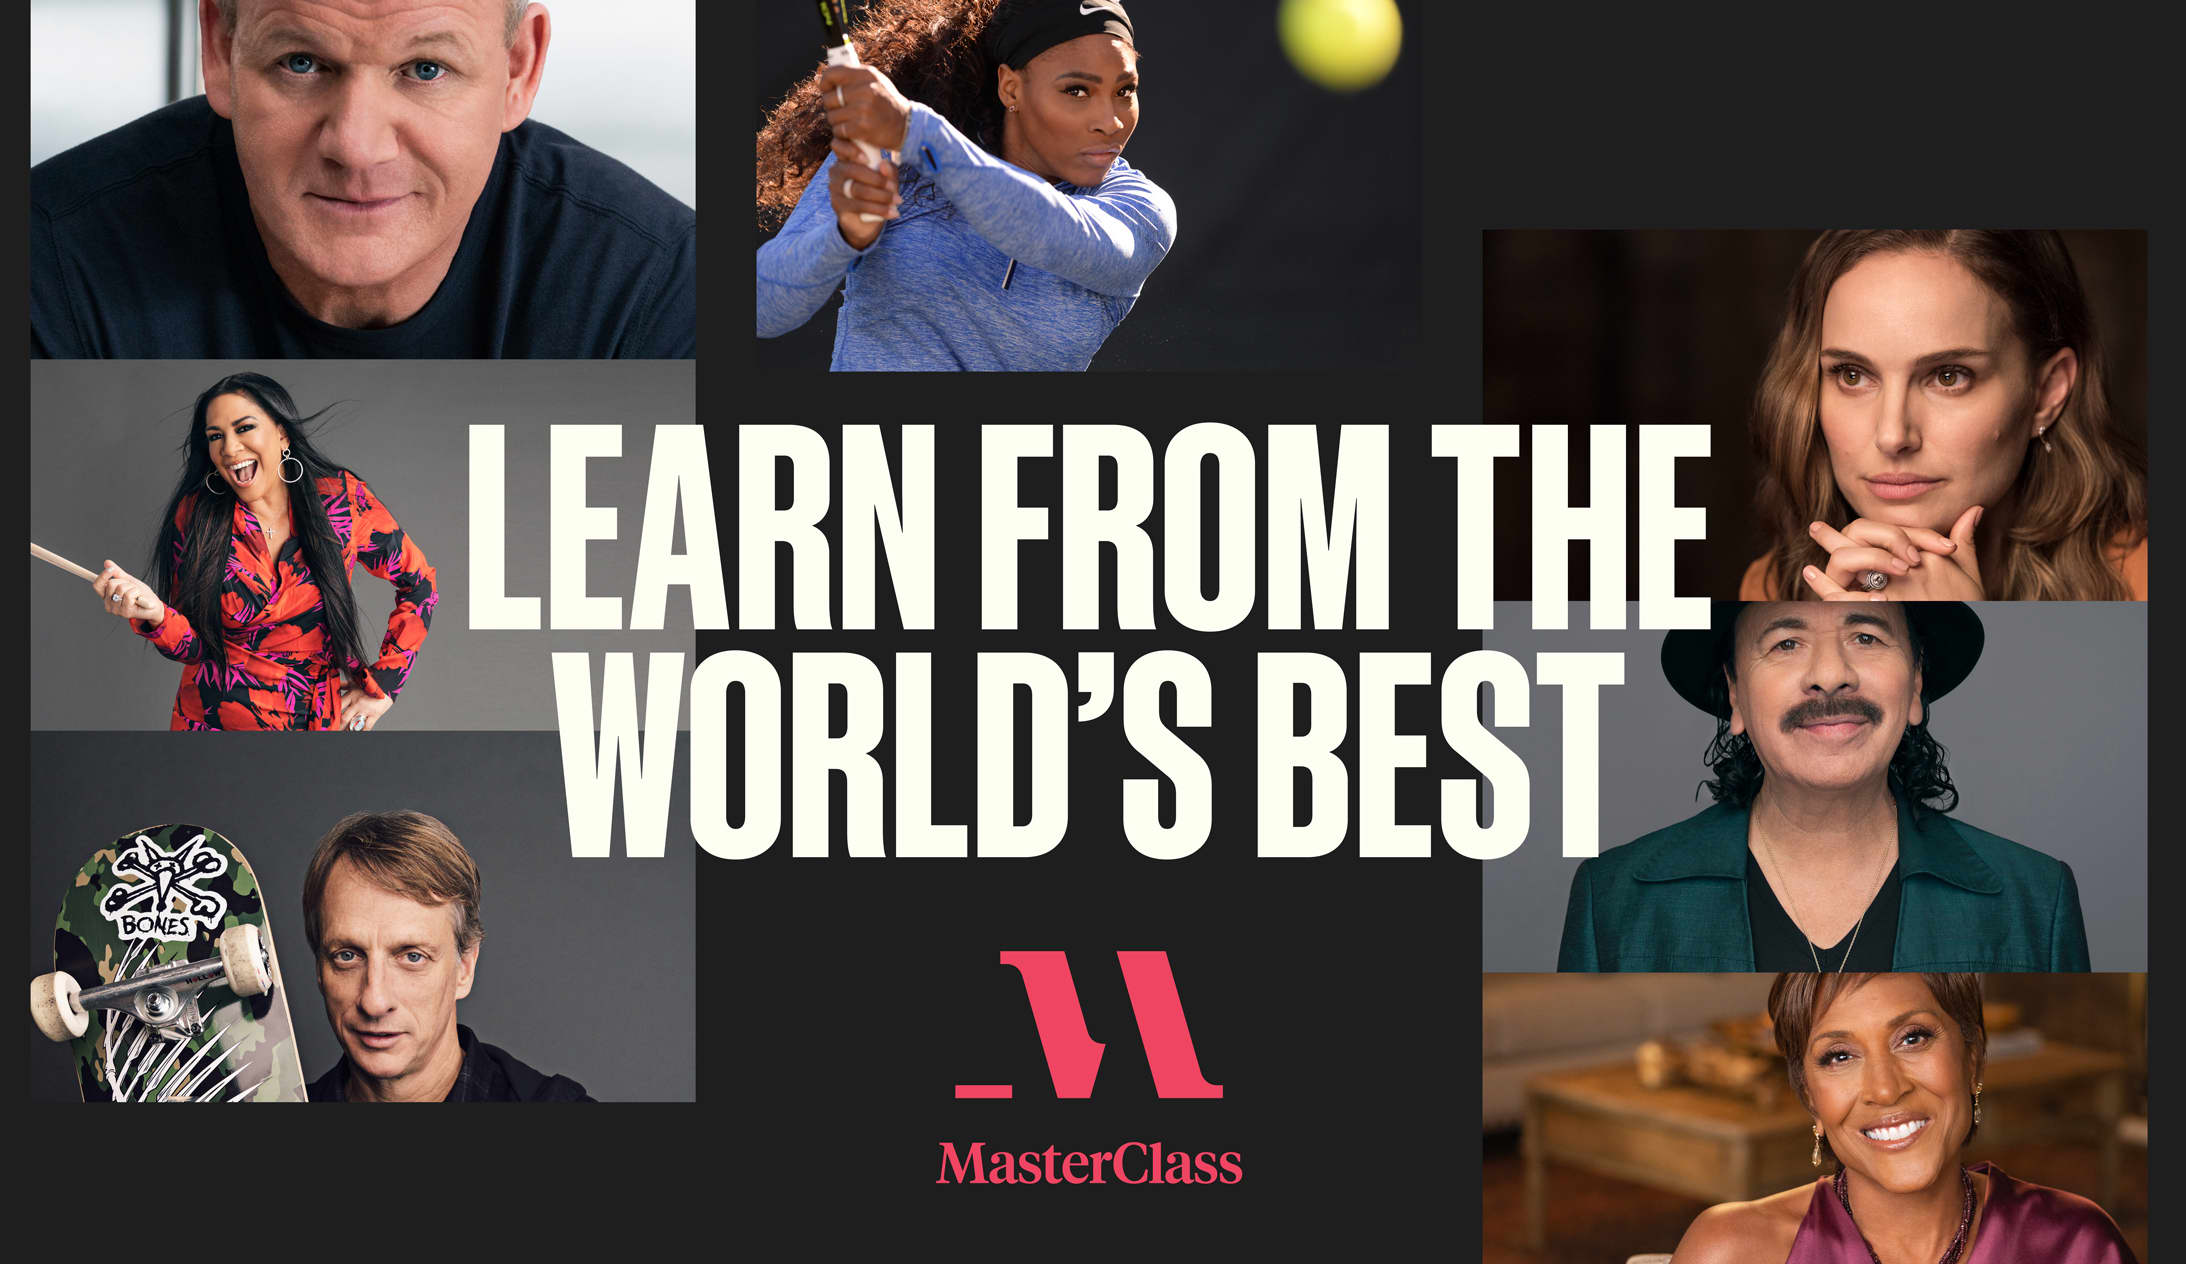 MasterClass more than triples valuation in one year, master class